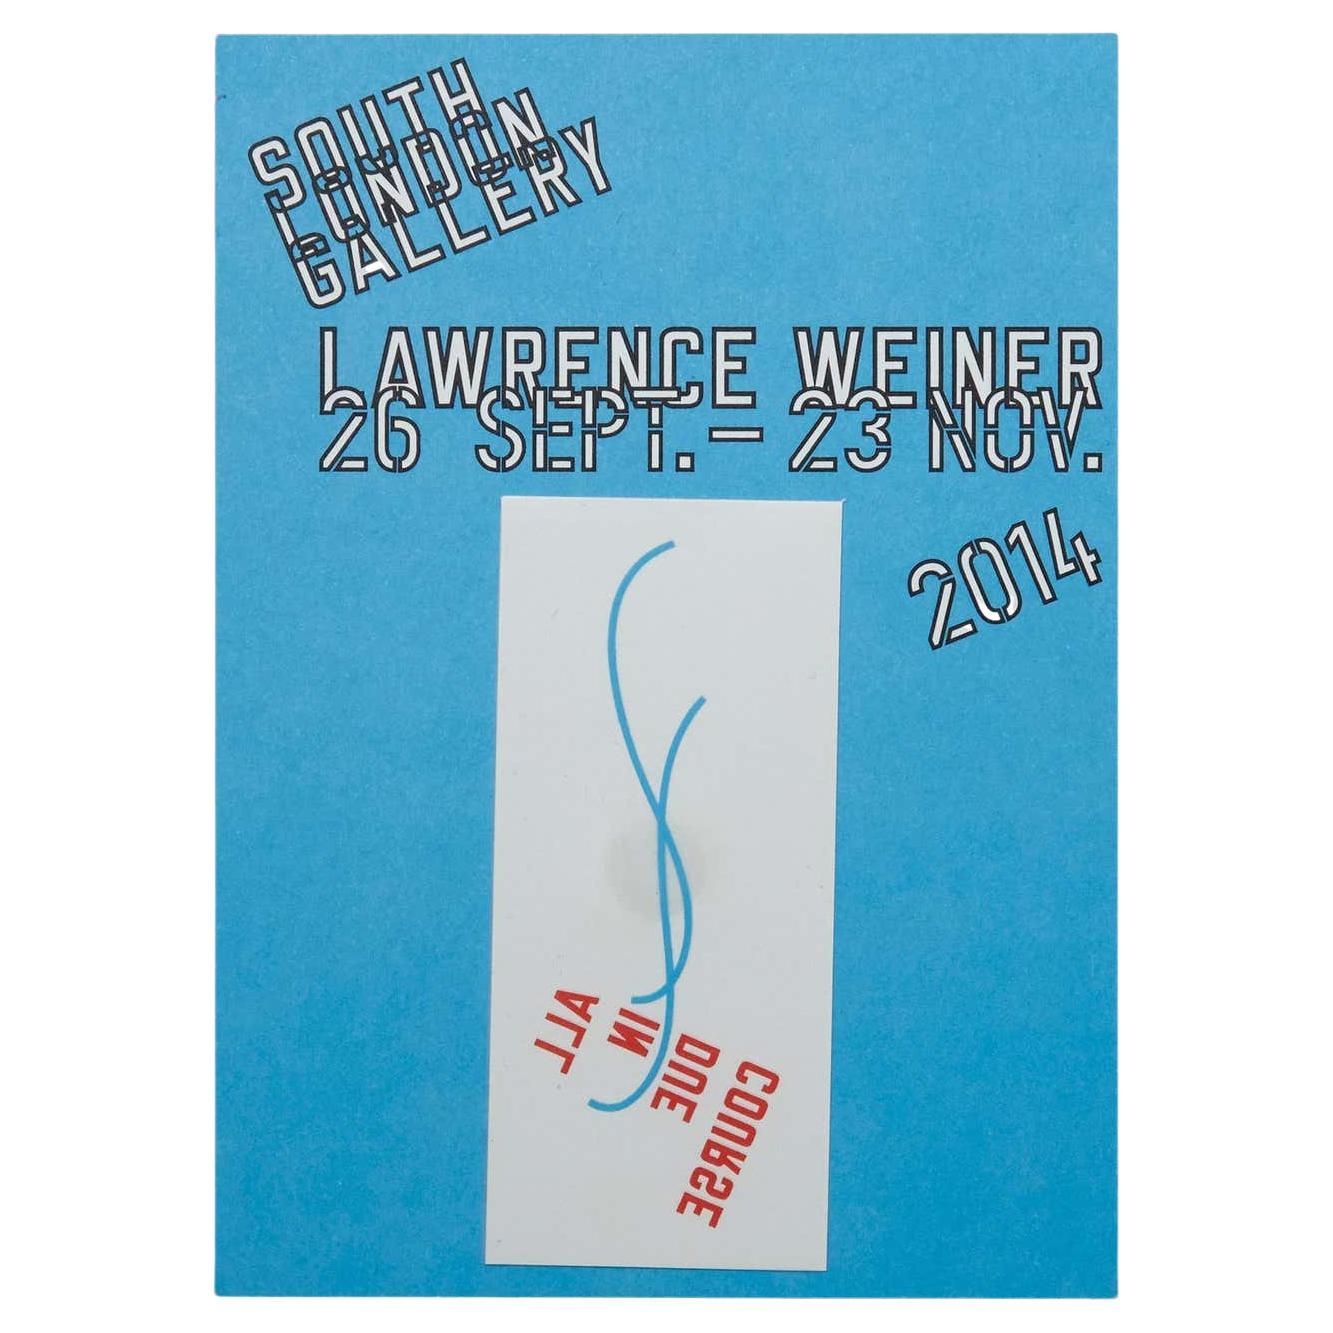 Lawrence Weiner Tattoo, limitierte Auflage, ALL IN DUE COURSE, South London Gallery  im Angebot